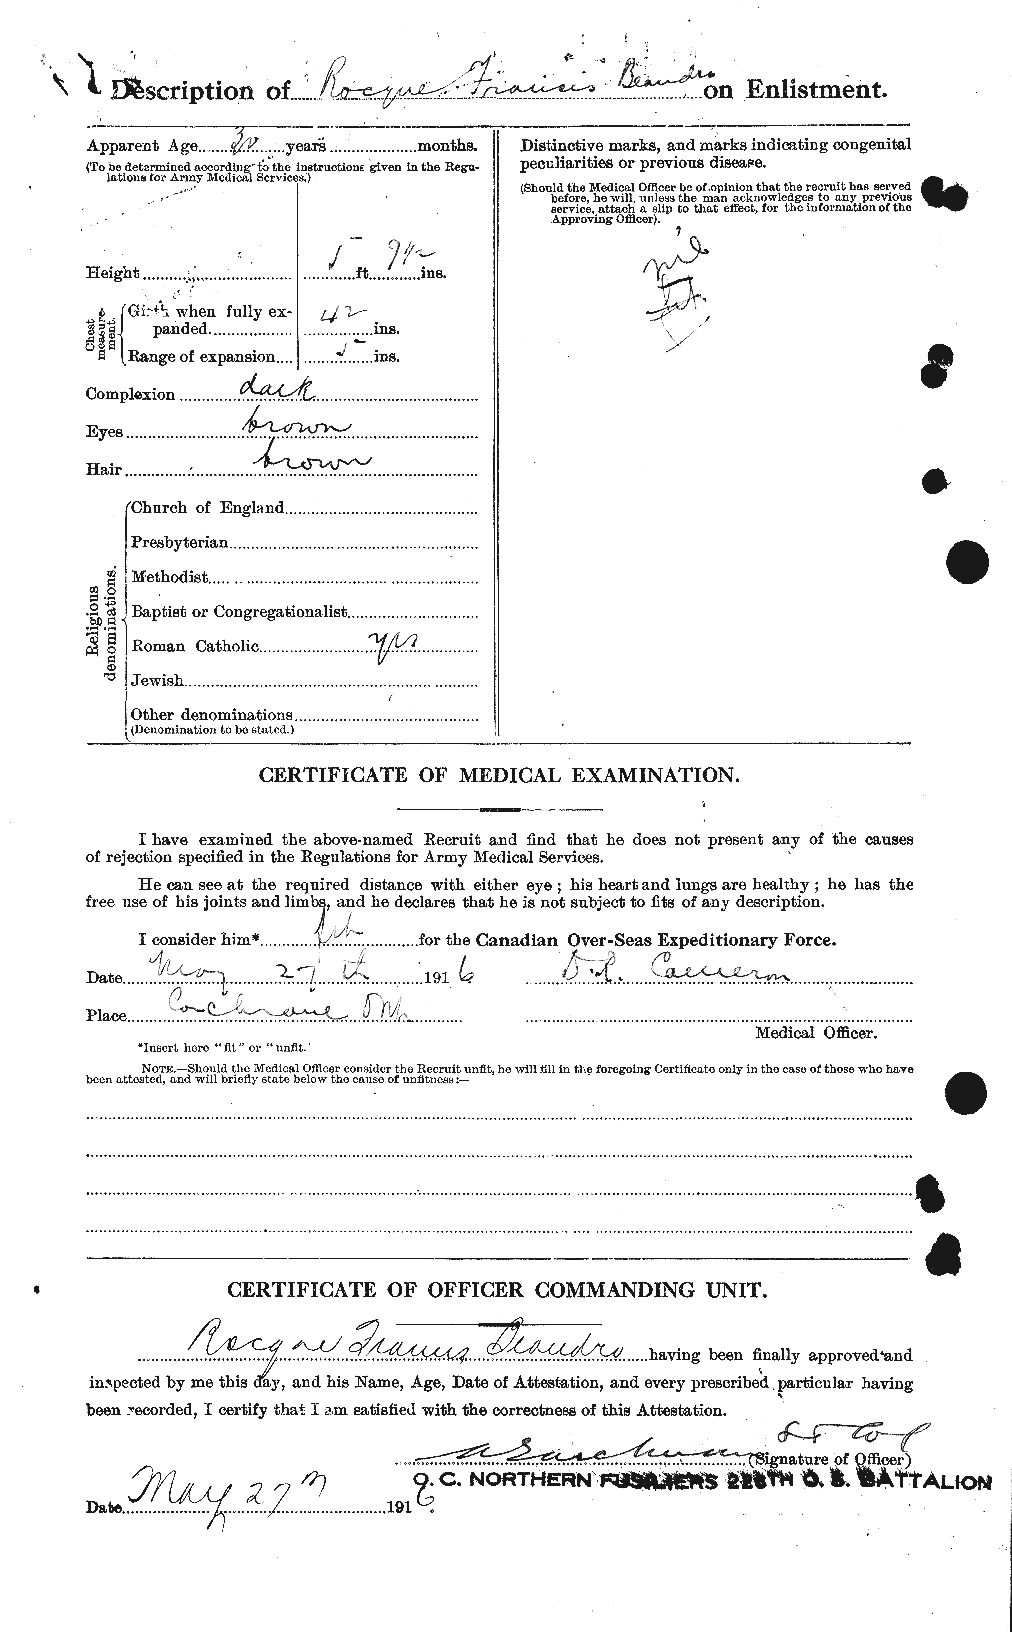 Personnel Records of the First World War - CEF 231321b